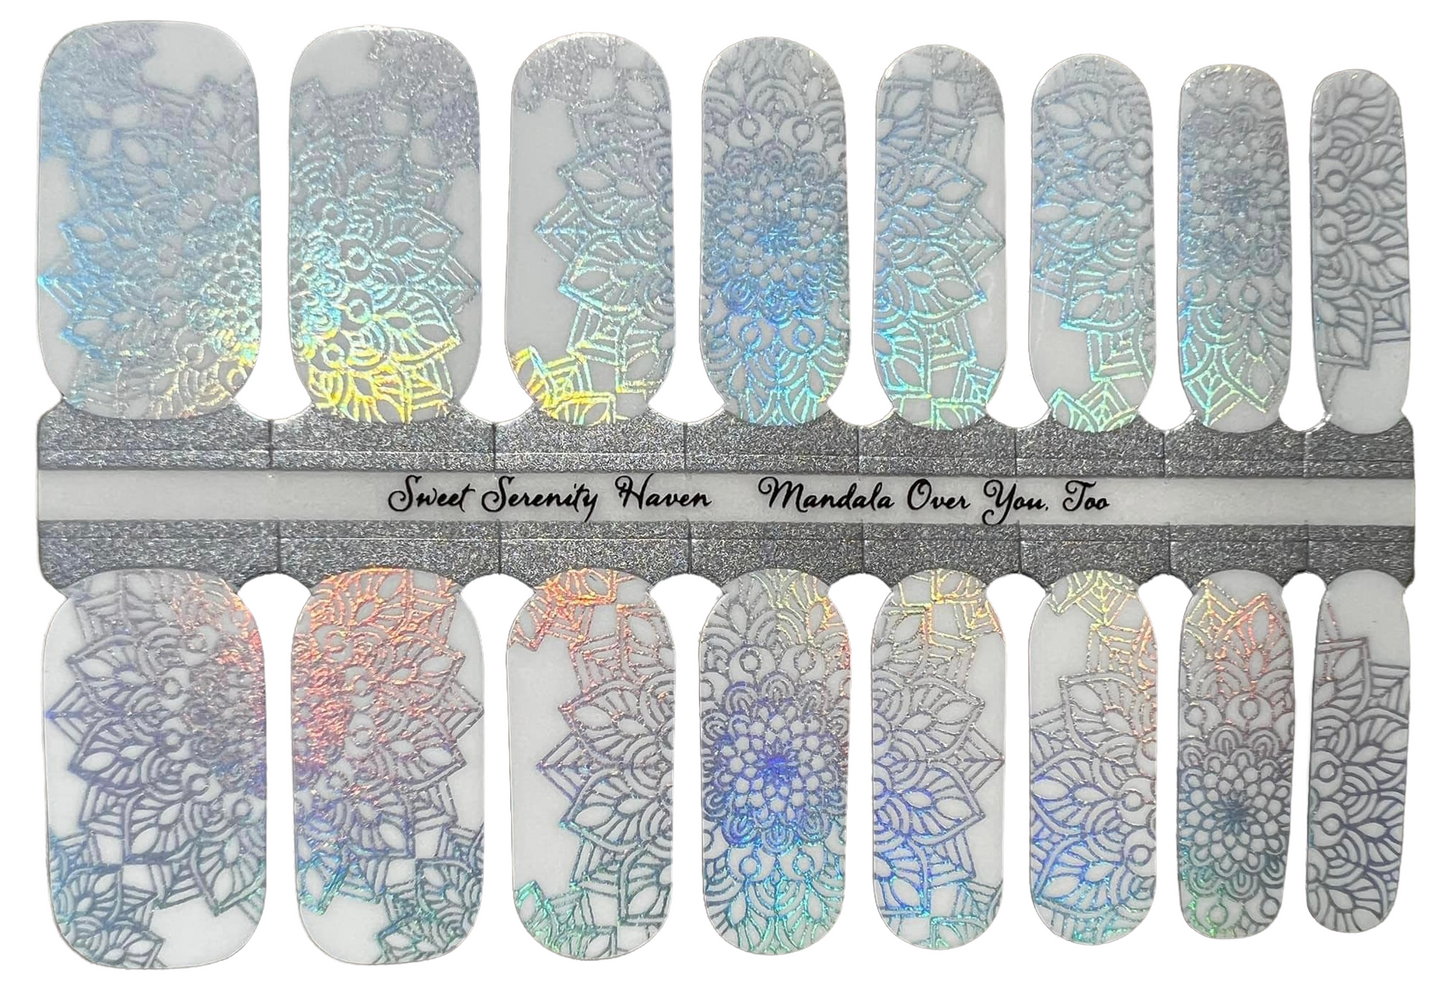 Mandala Over You Too (Transparent) - Exclusive SSH Limited Edition